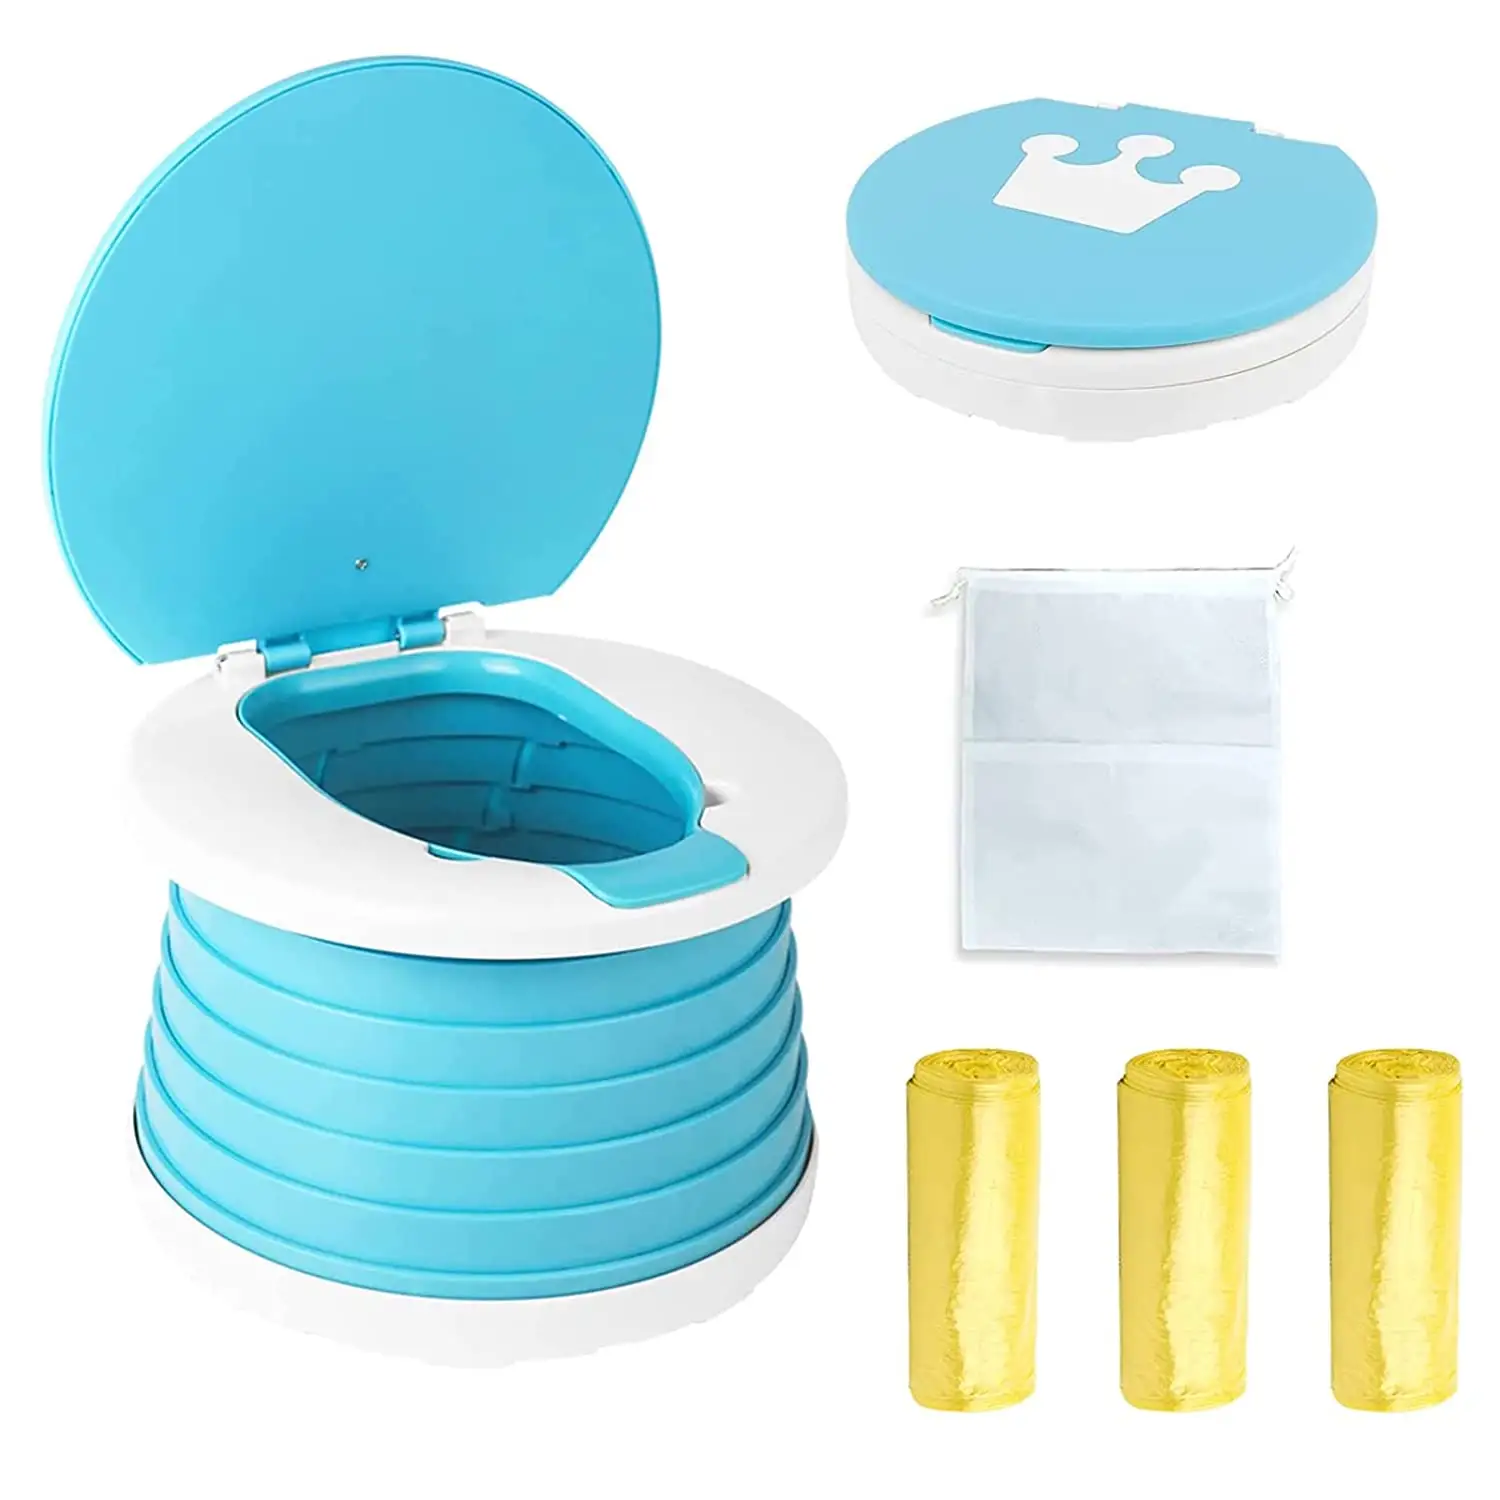 Wholesale Home Station Foldable Kids Toilet Travel Round Foldable Baby Toilets Potty Training Foldable Toilet For Children Baby